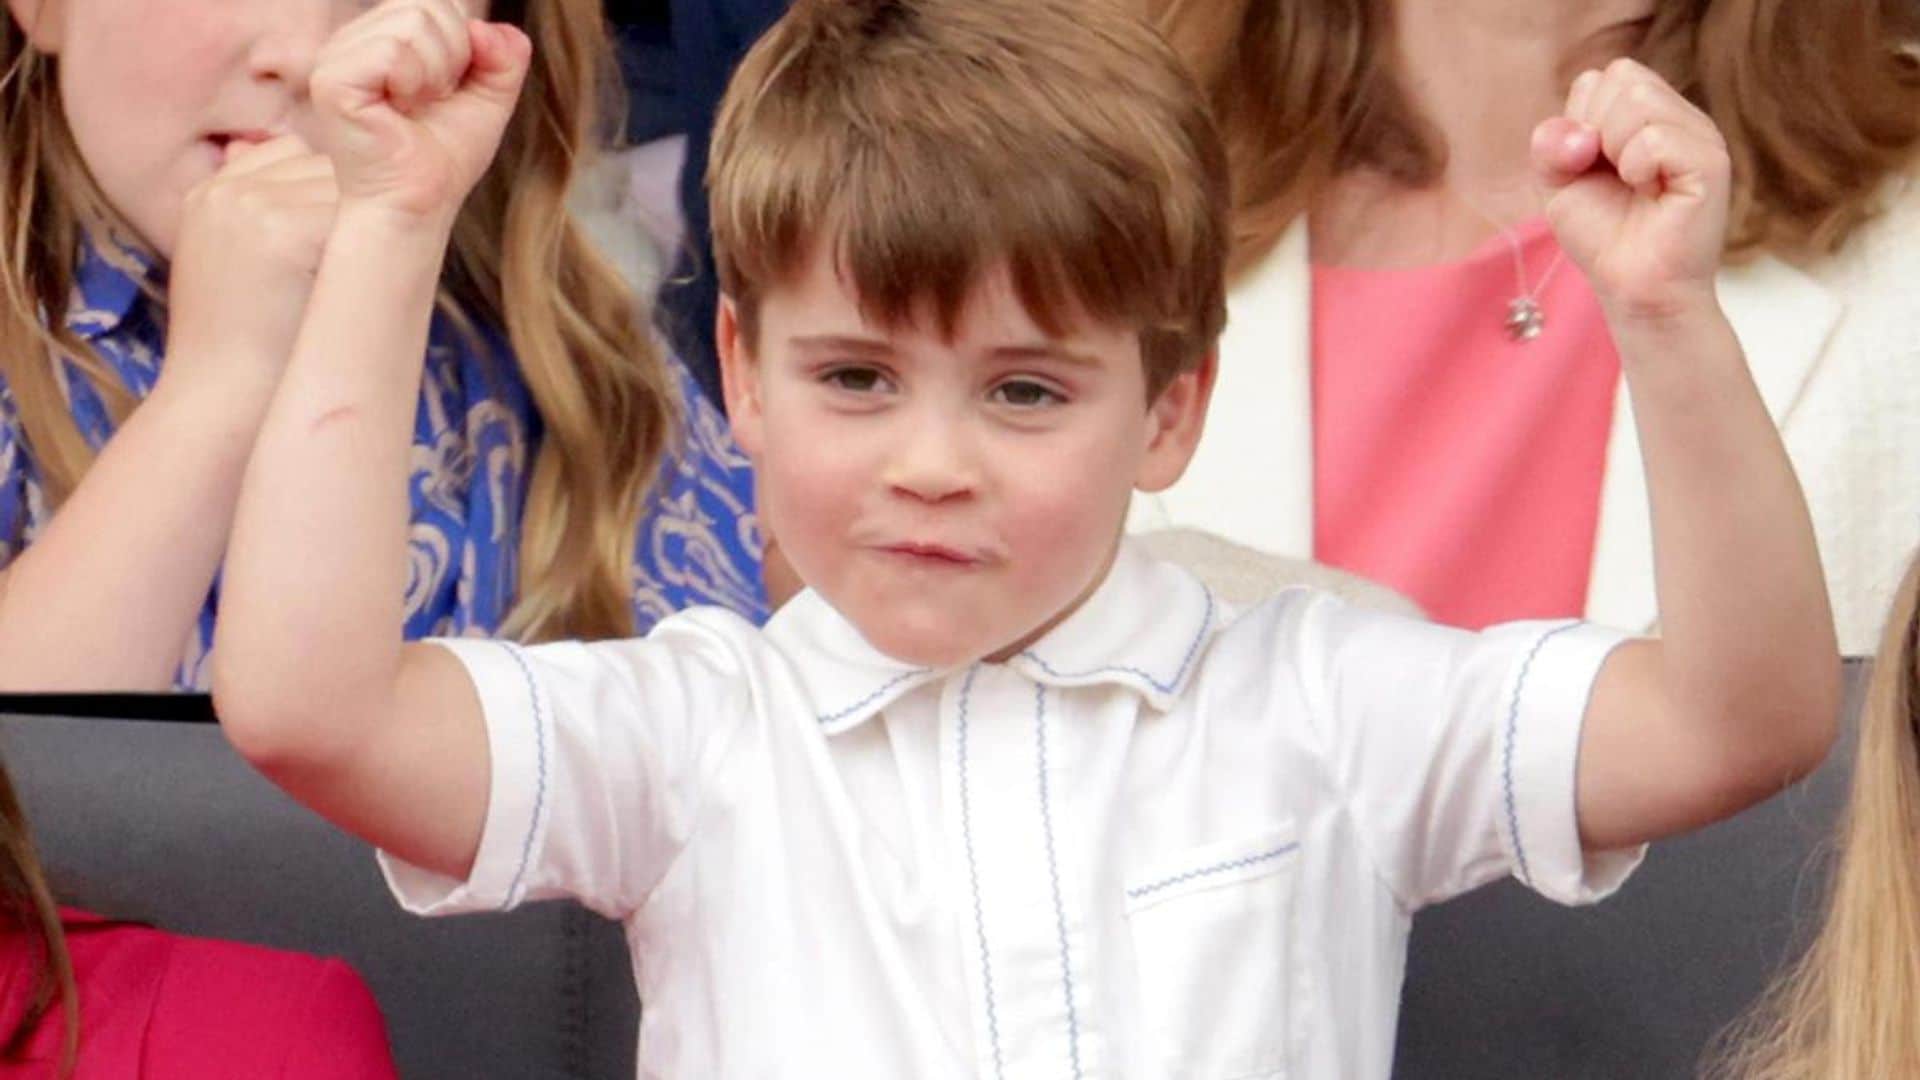 Every must-see photo of Prince Louis from Queen Elizabeth’s Platinum Jubilee Celebrations